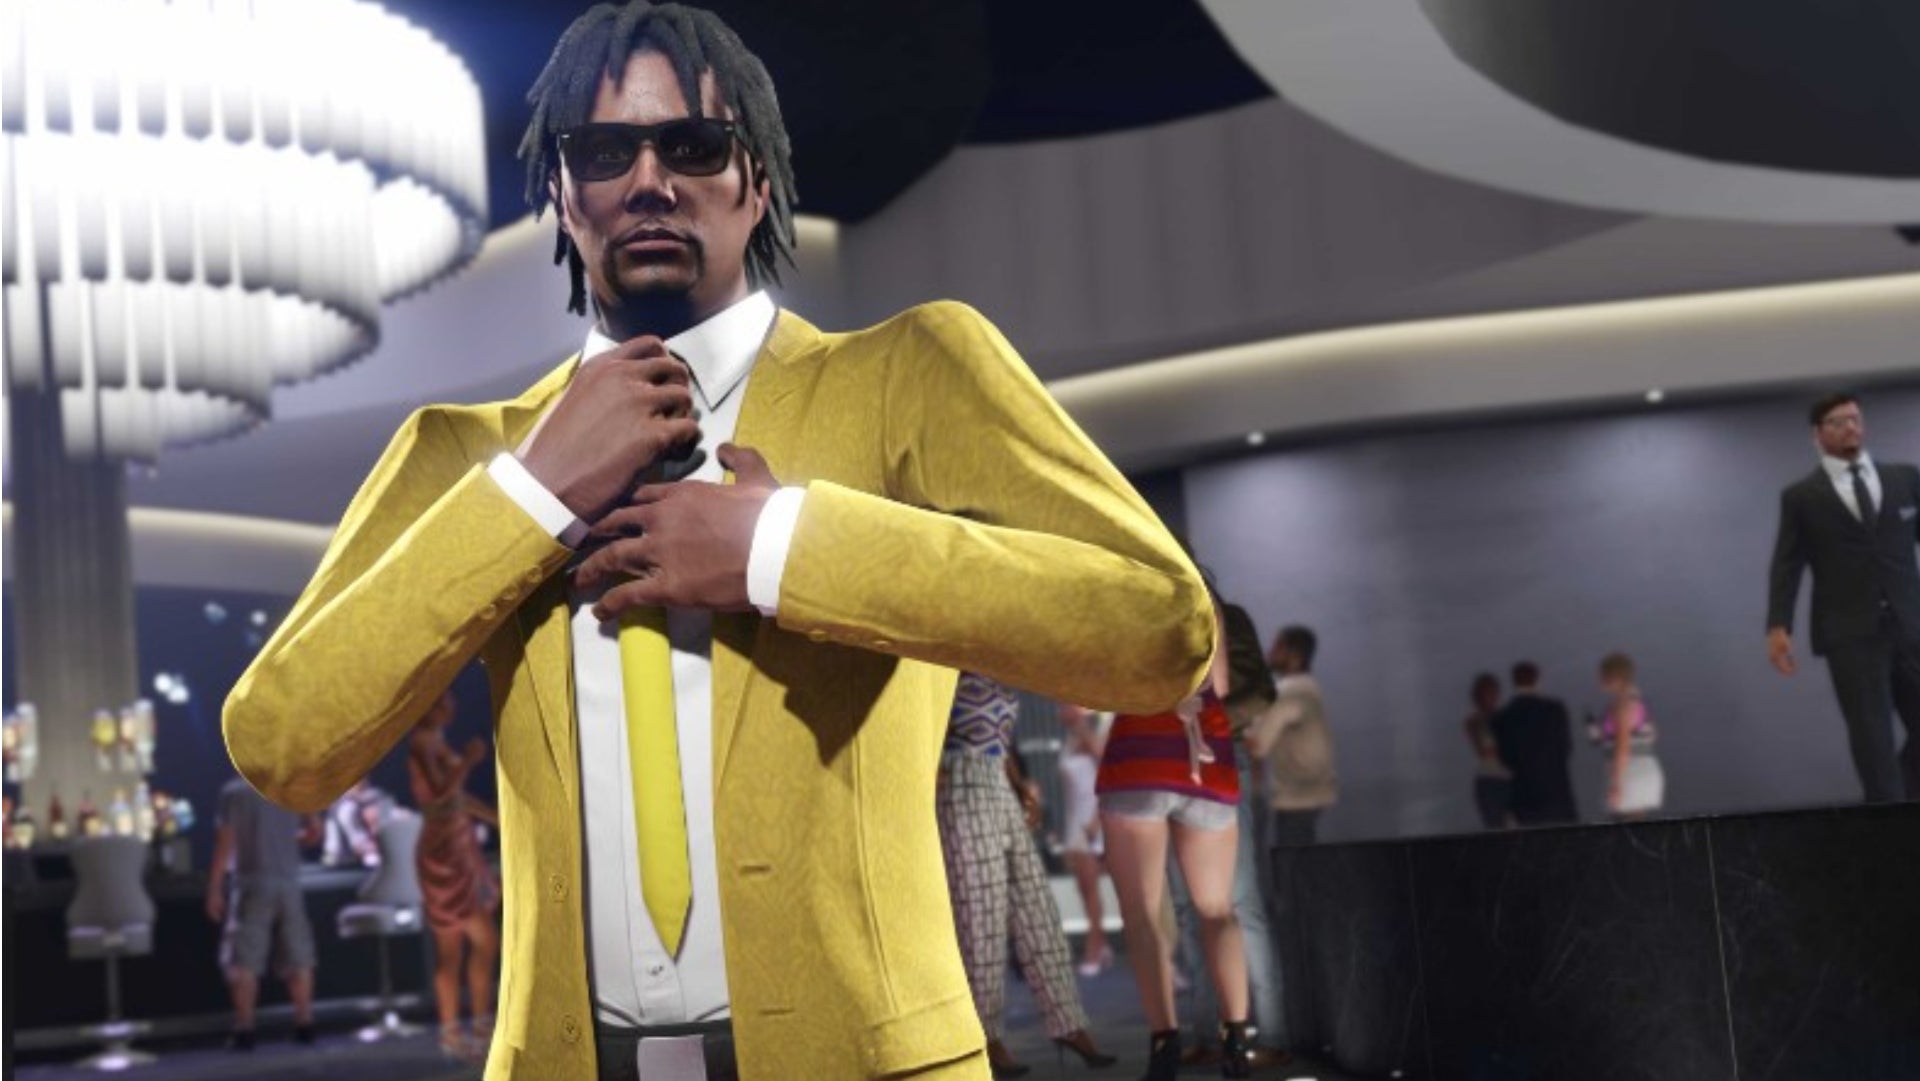 GTA Online official Rockstar image of a character in a yellow suit in the Diamond Casino.